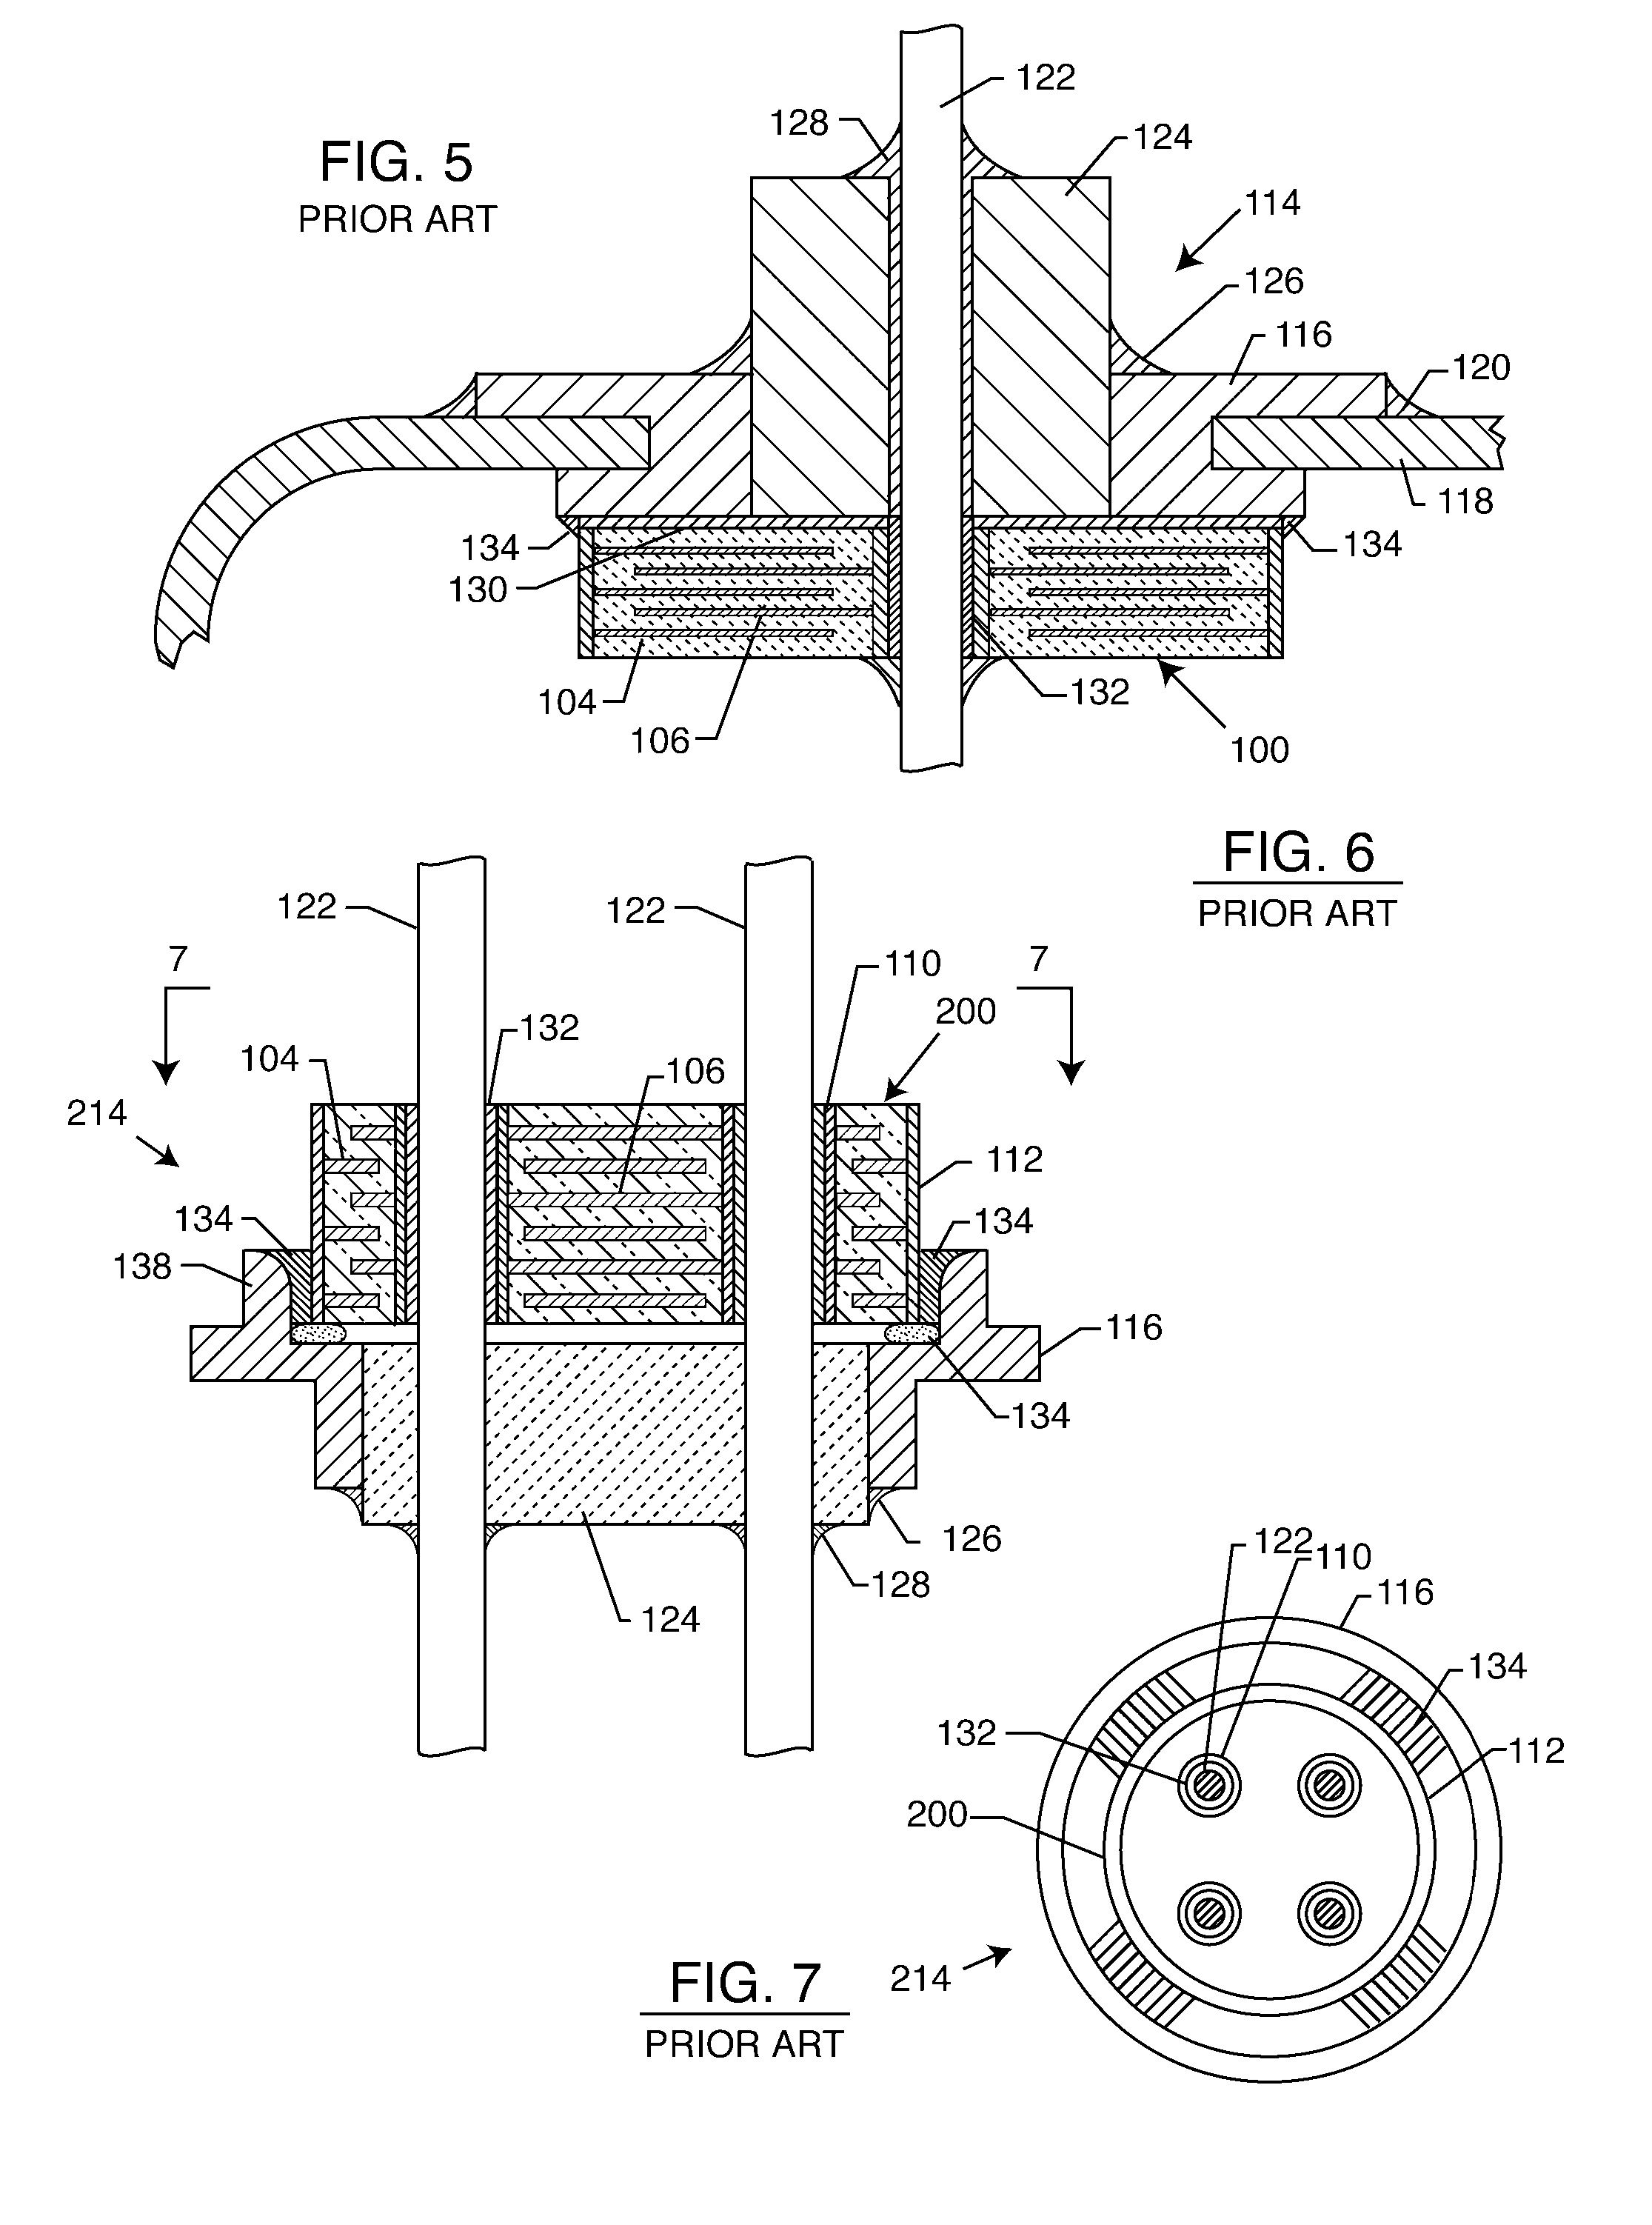 Hybrid spring contact system for EMI filtered hermetic seals for active implantable medical devices